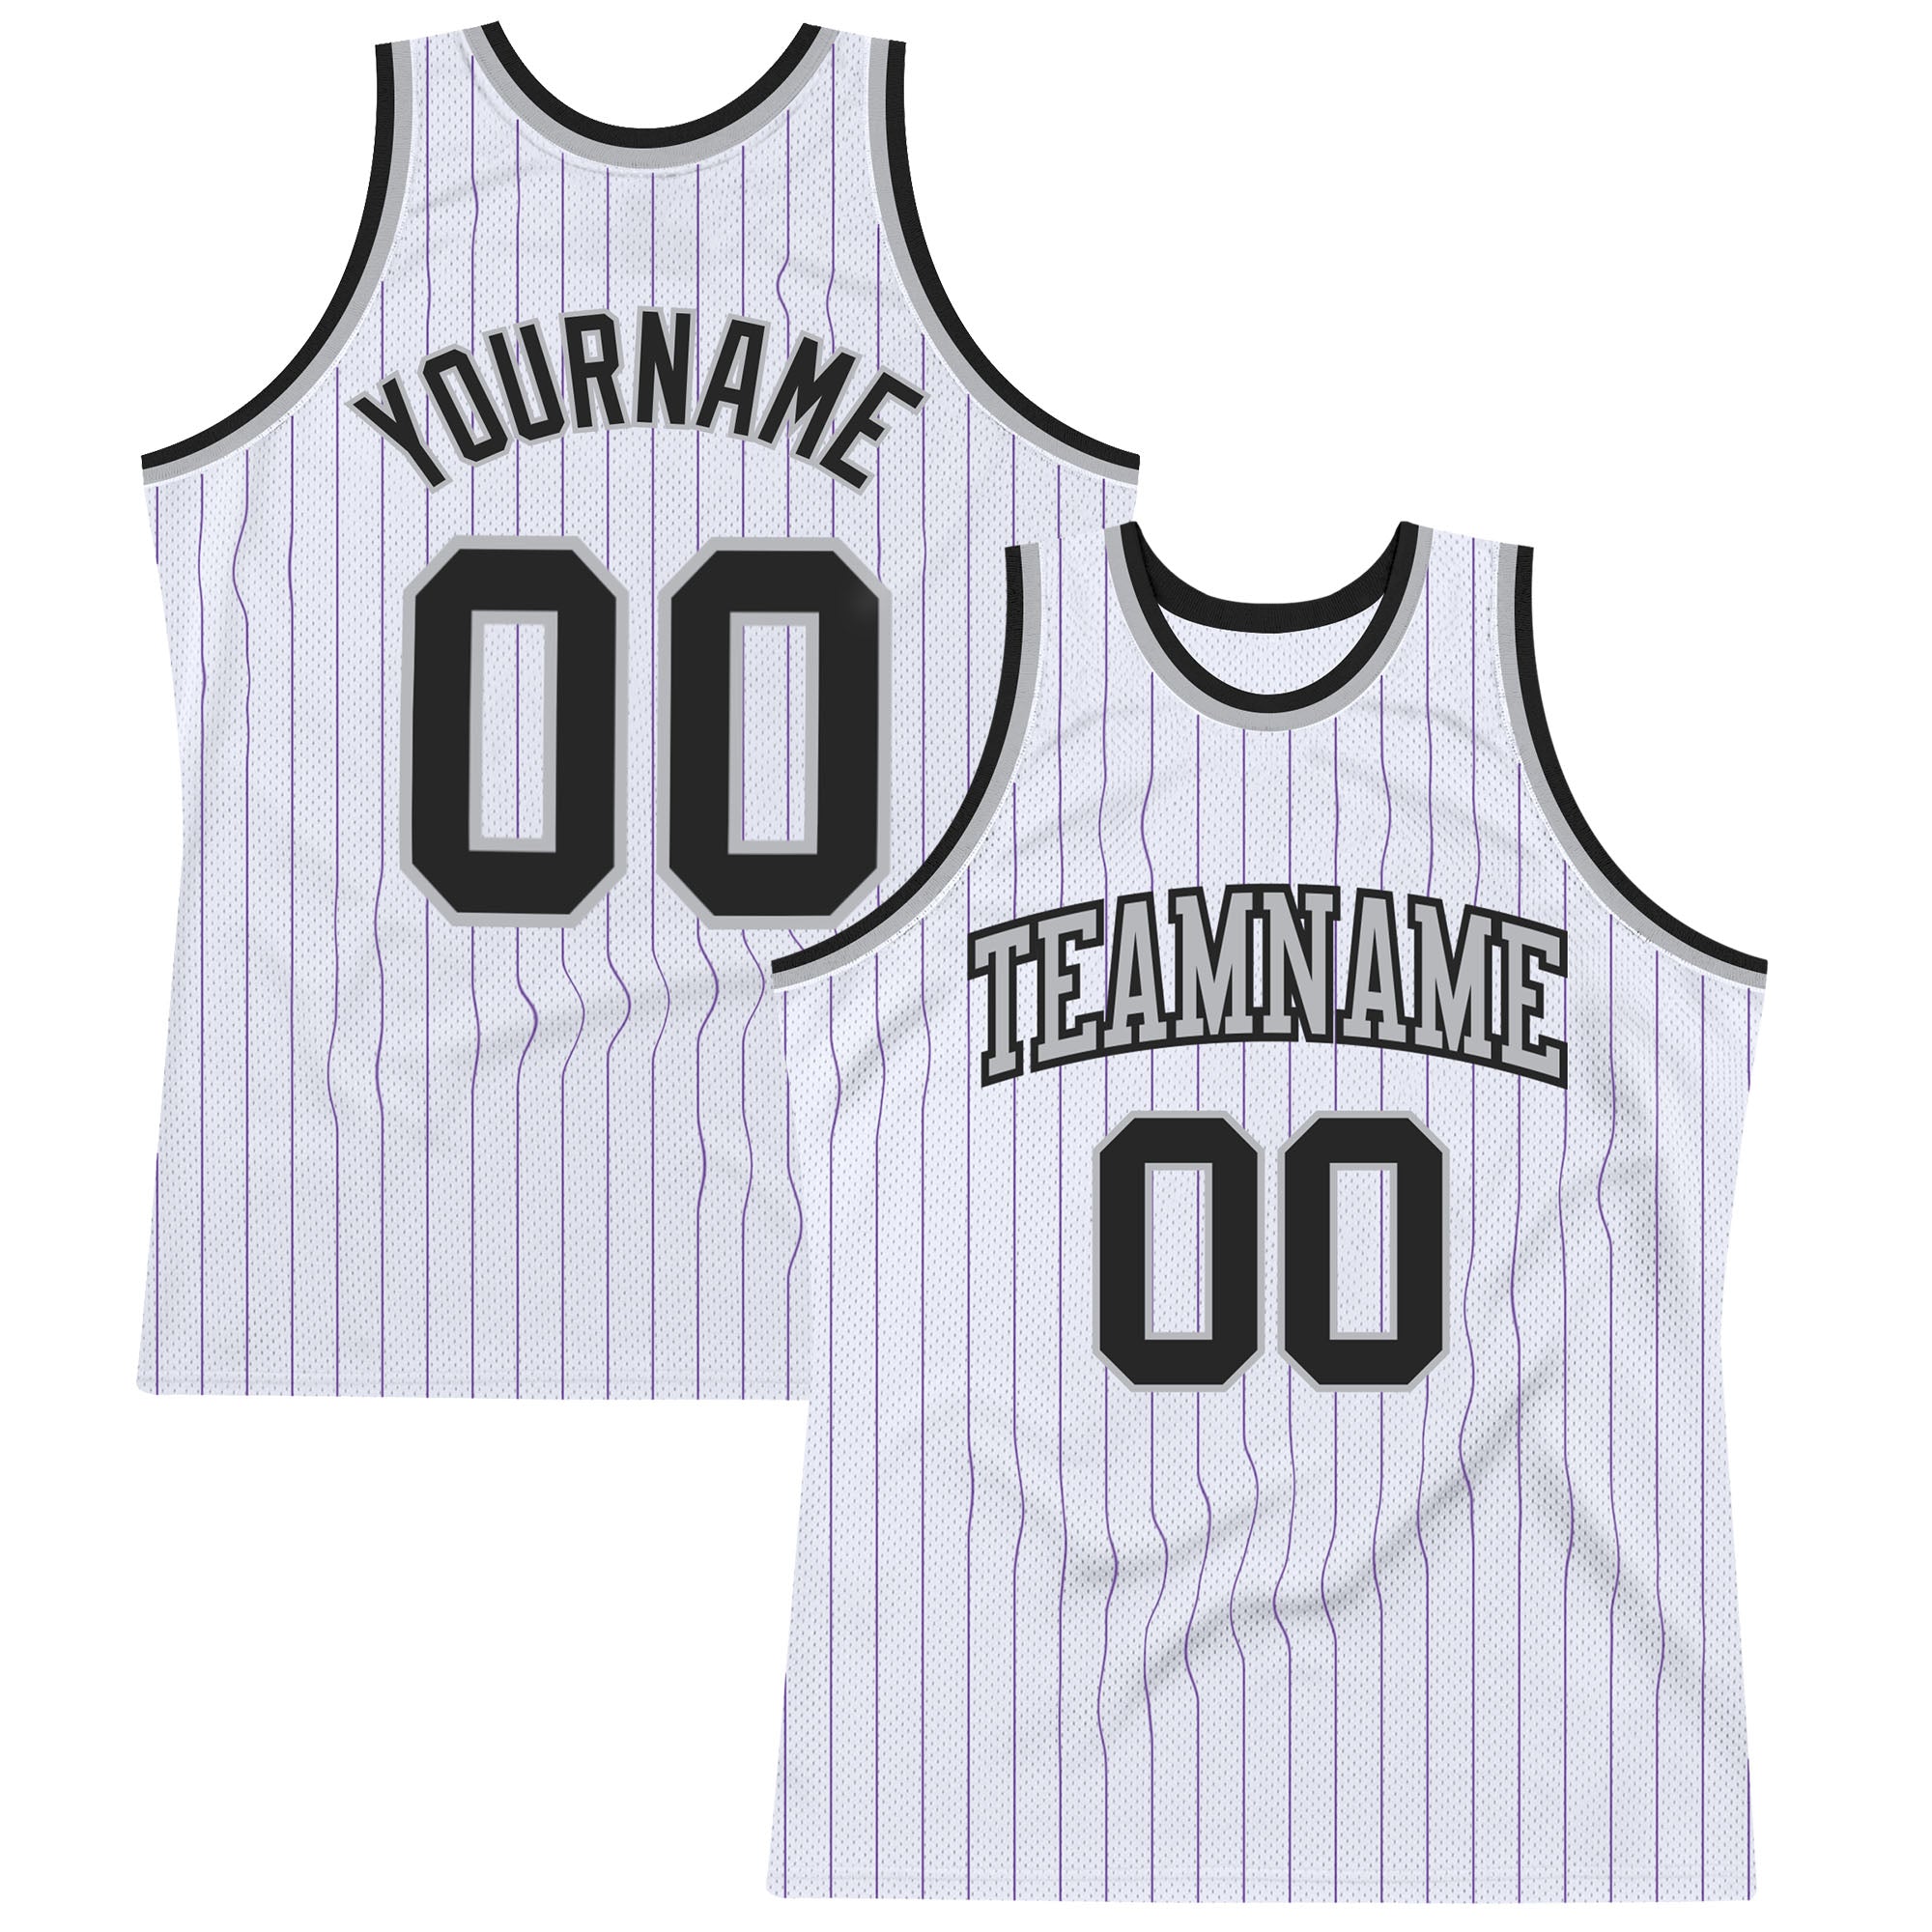 design purple and white basketball jersey